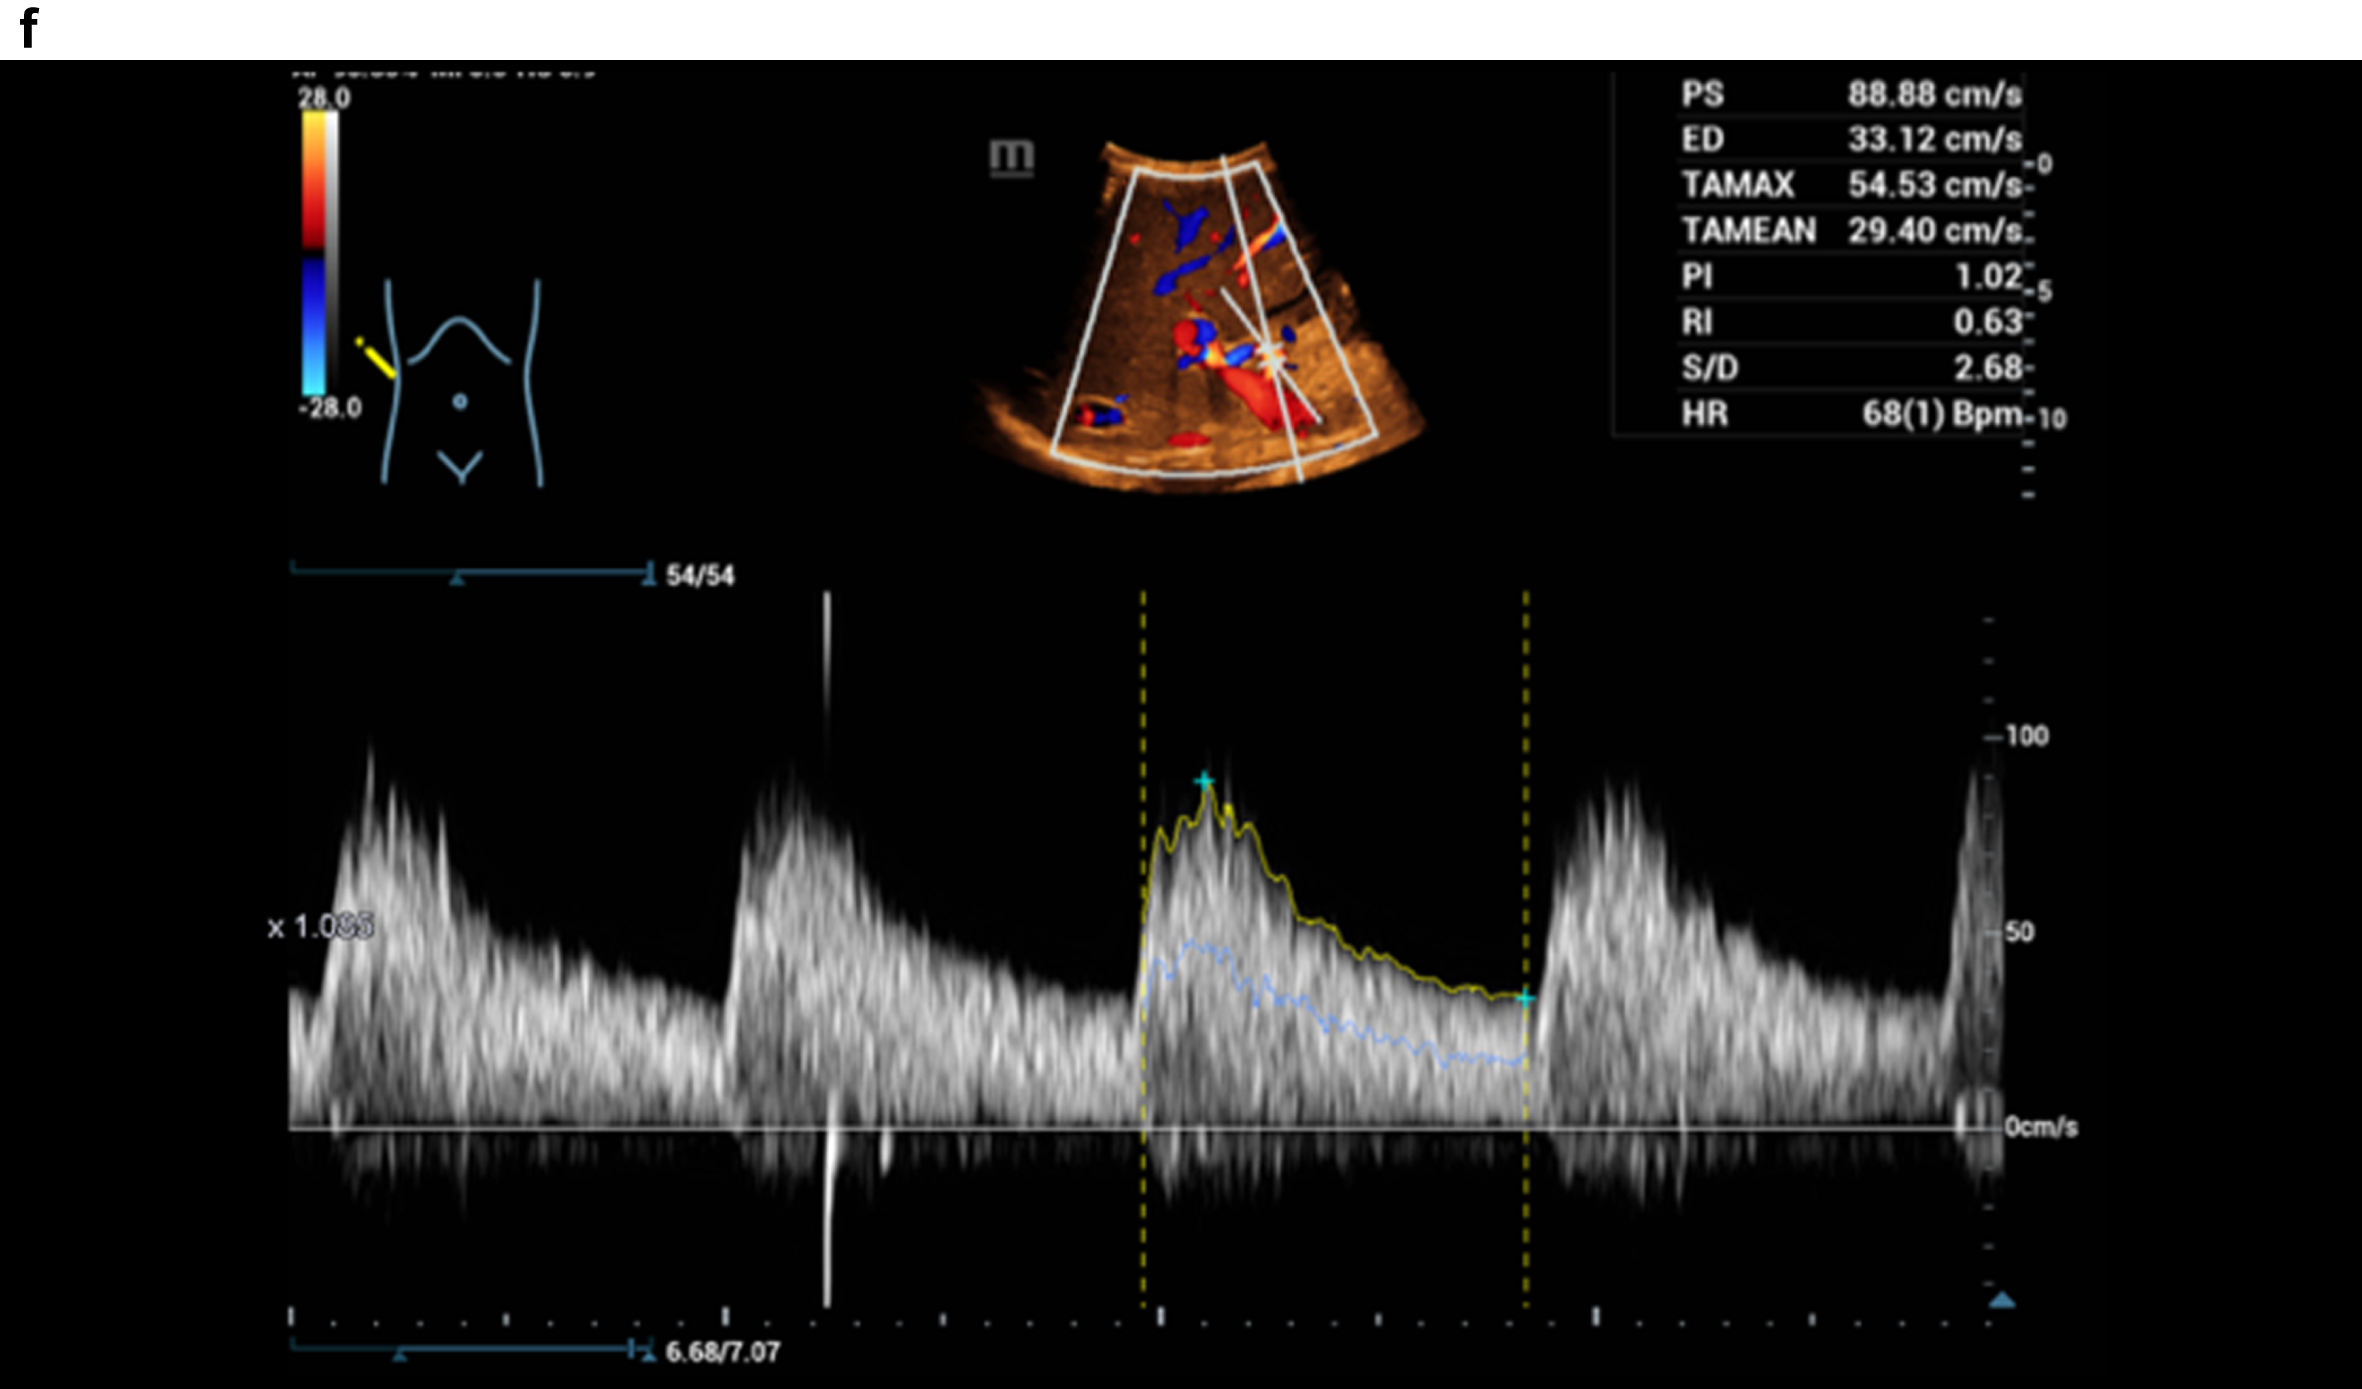 Haemodynamic assessment of the hepatic artery with CCDS, HR and Glazing Flow.